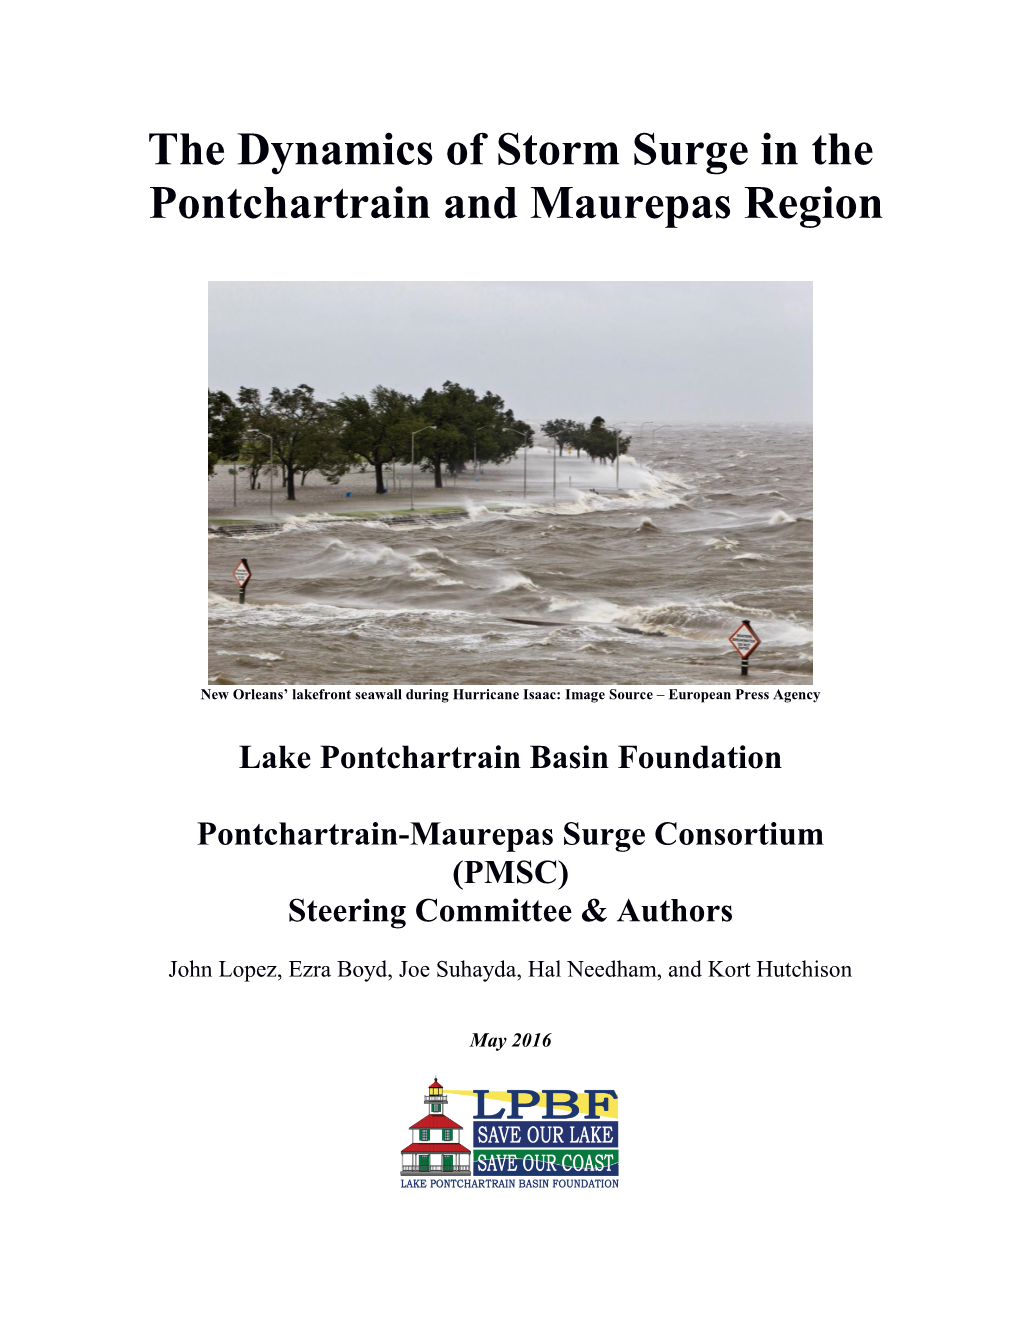 The Dynamics of Storm Surge in the Pontchartrain and Maurepas Region